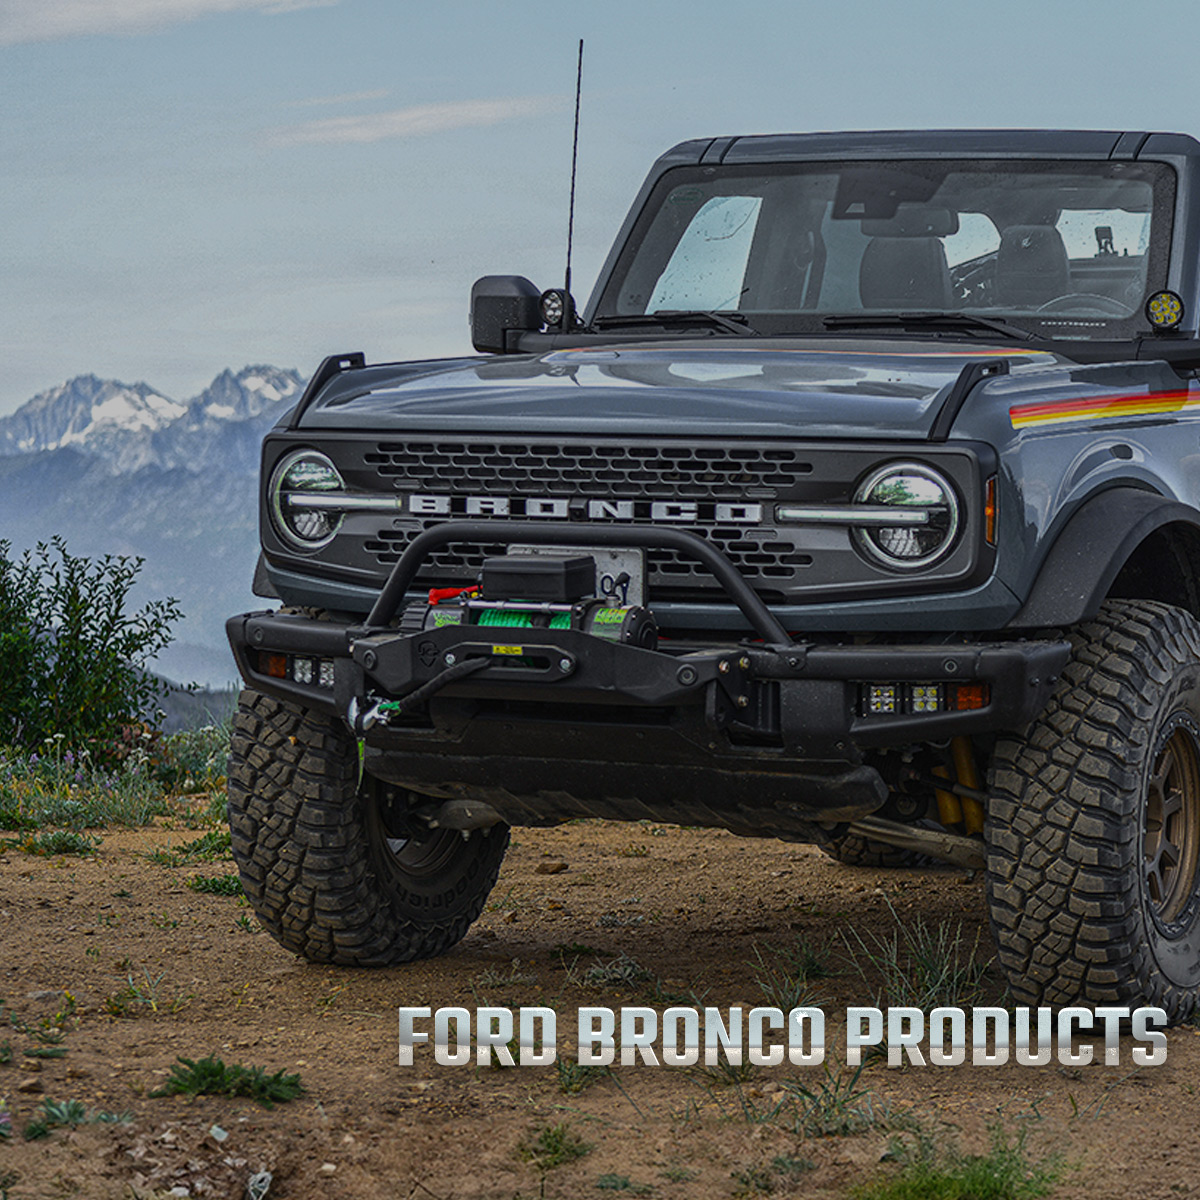 Scorpion Extreme Products Ford Bronco Products